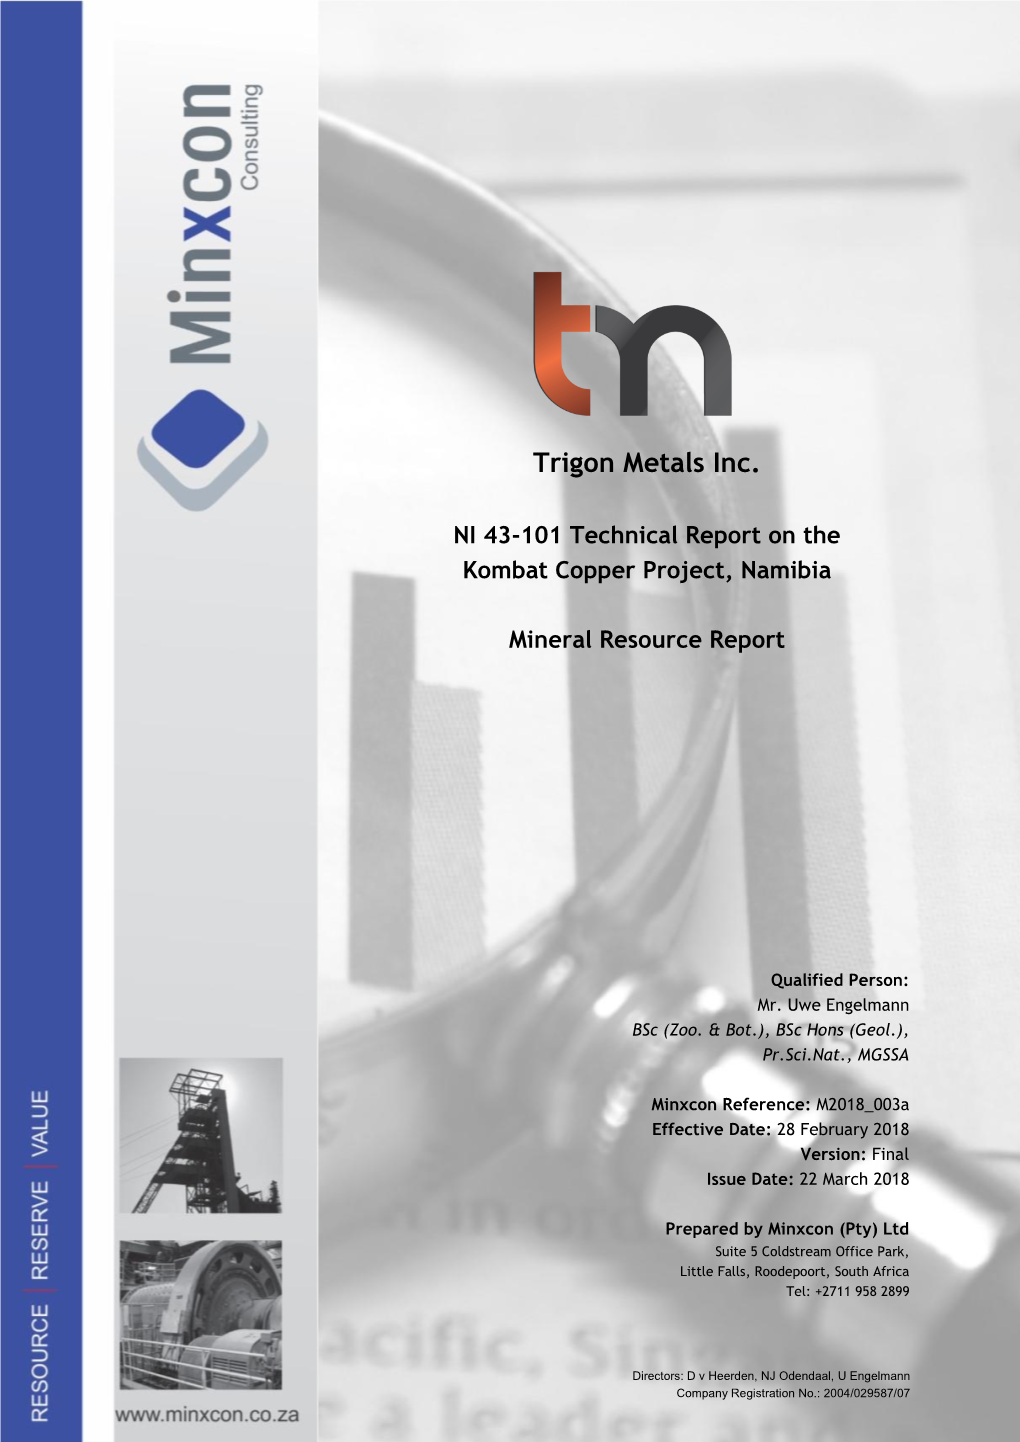 NI 43-101 Technical Report on the Kombat Copper Project, Namibia